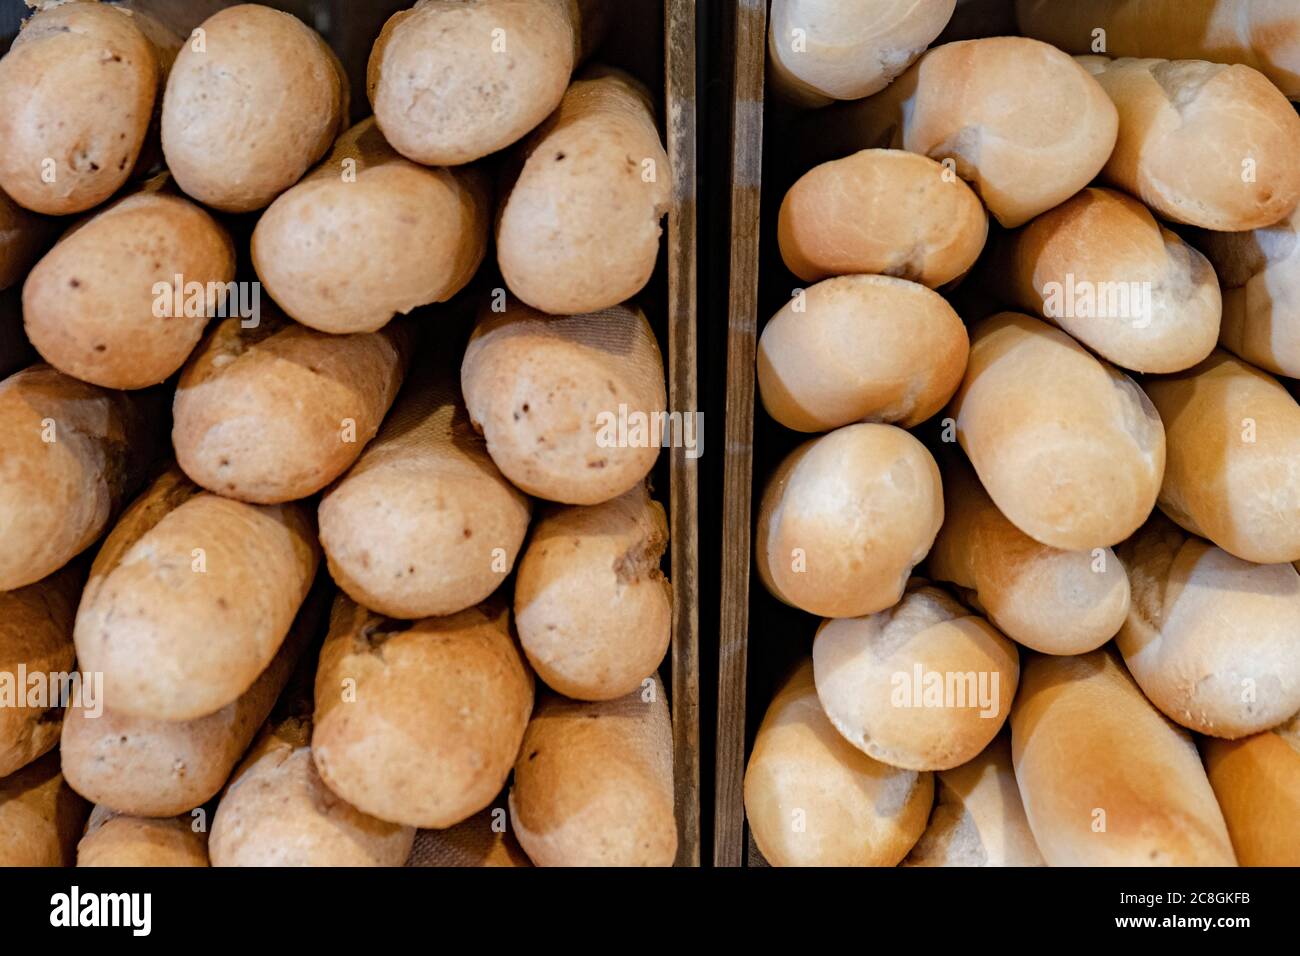 Stacked loaves of bread Stock Photo